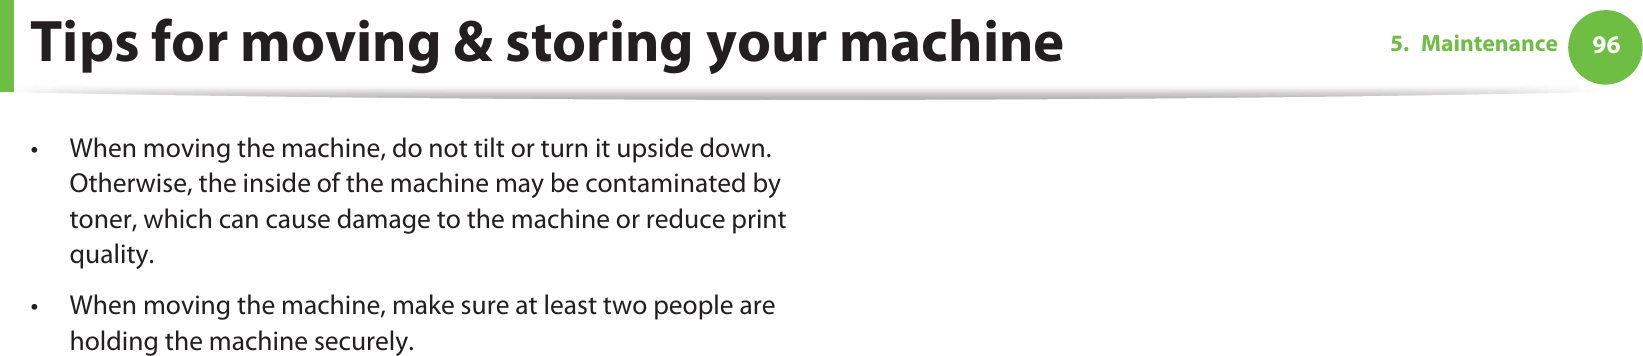 965. MaintenanceTips for moving &amp; storing your machine• When moving the machine, do not tilt or turn it upside down. Otherwise, the inside of the machine may be contaminated by toner, which can cause damage to the machine or reduce print quality.• When moving the machine, make sure at least two people are holding the machine securely. 